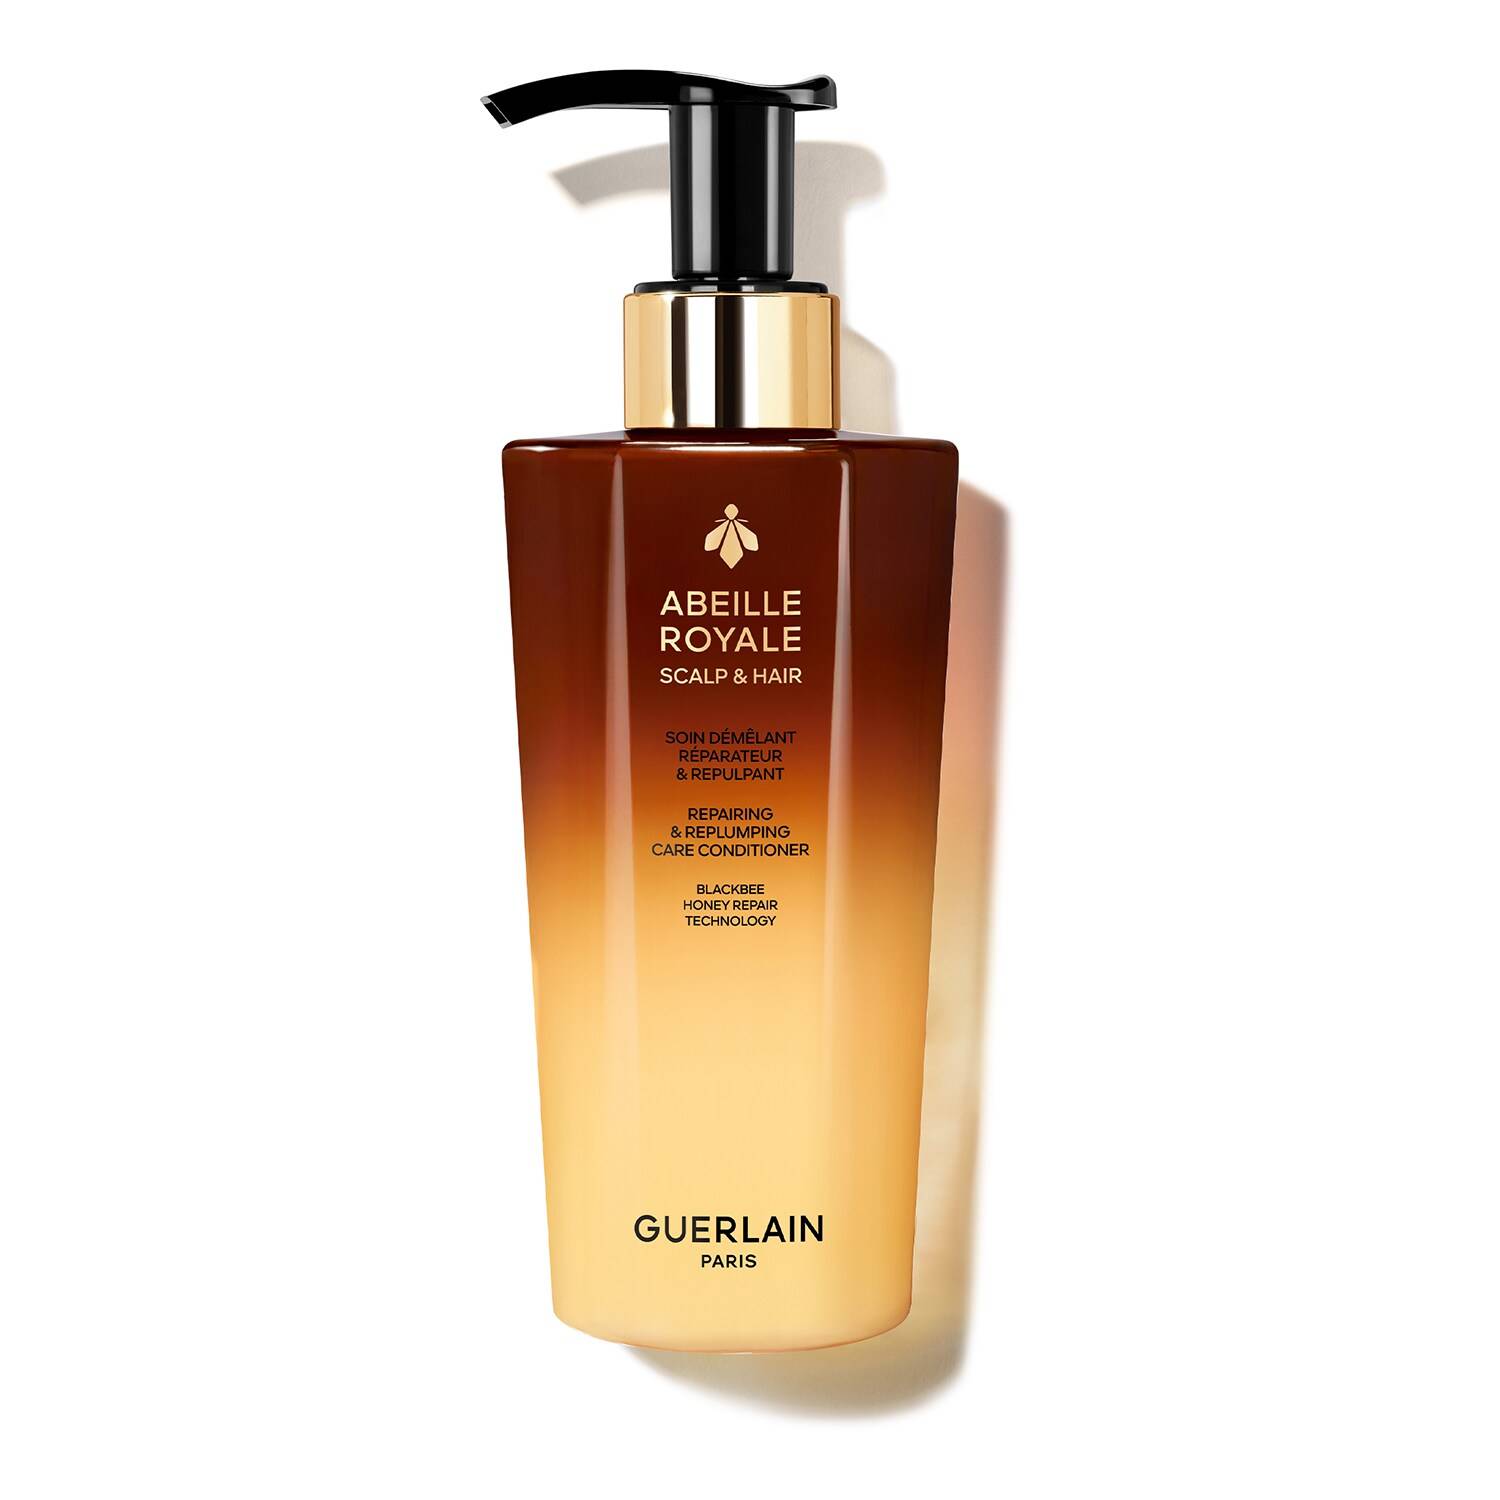 Guerlain Abeille Royale - Repairing & Replumping Care Conditioner 290Ml